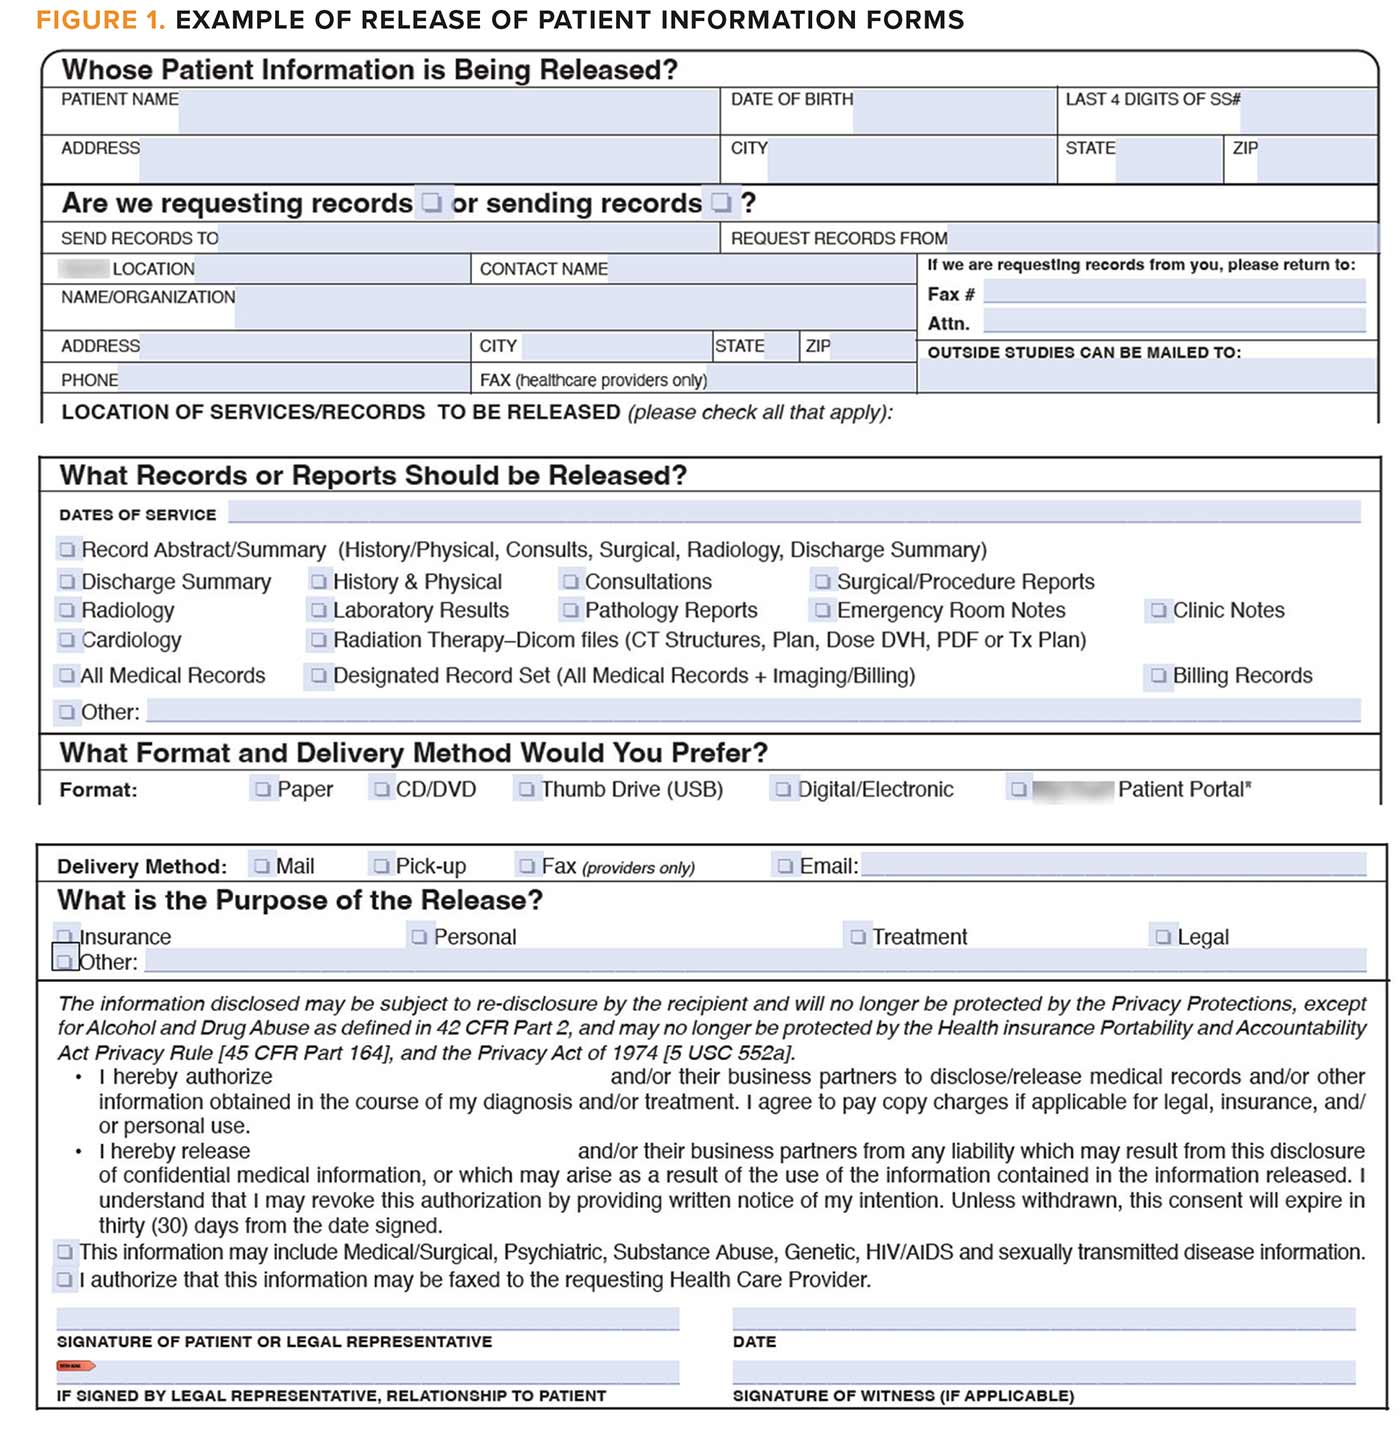 Figure 1. Example of patient information forms